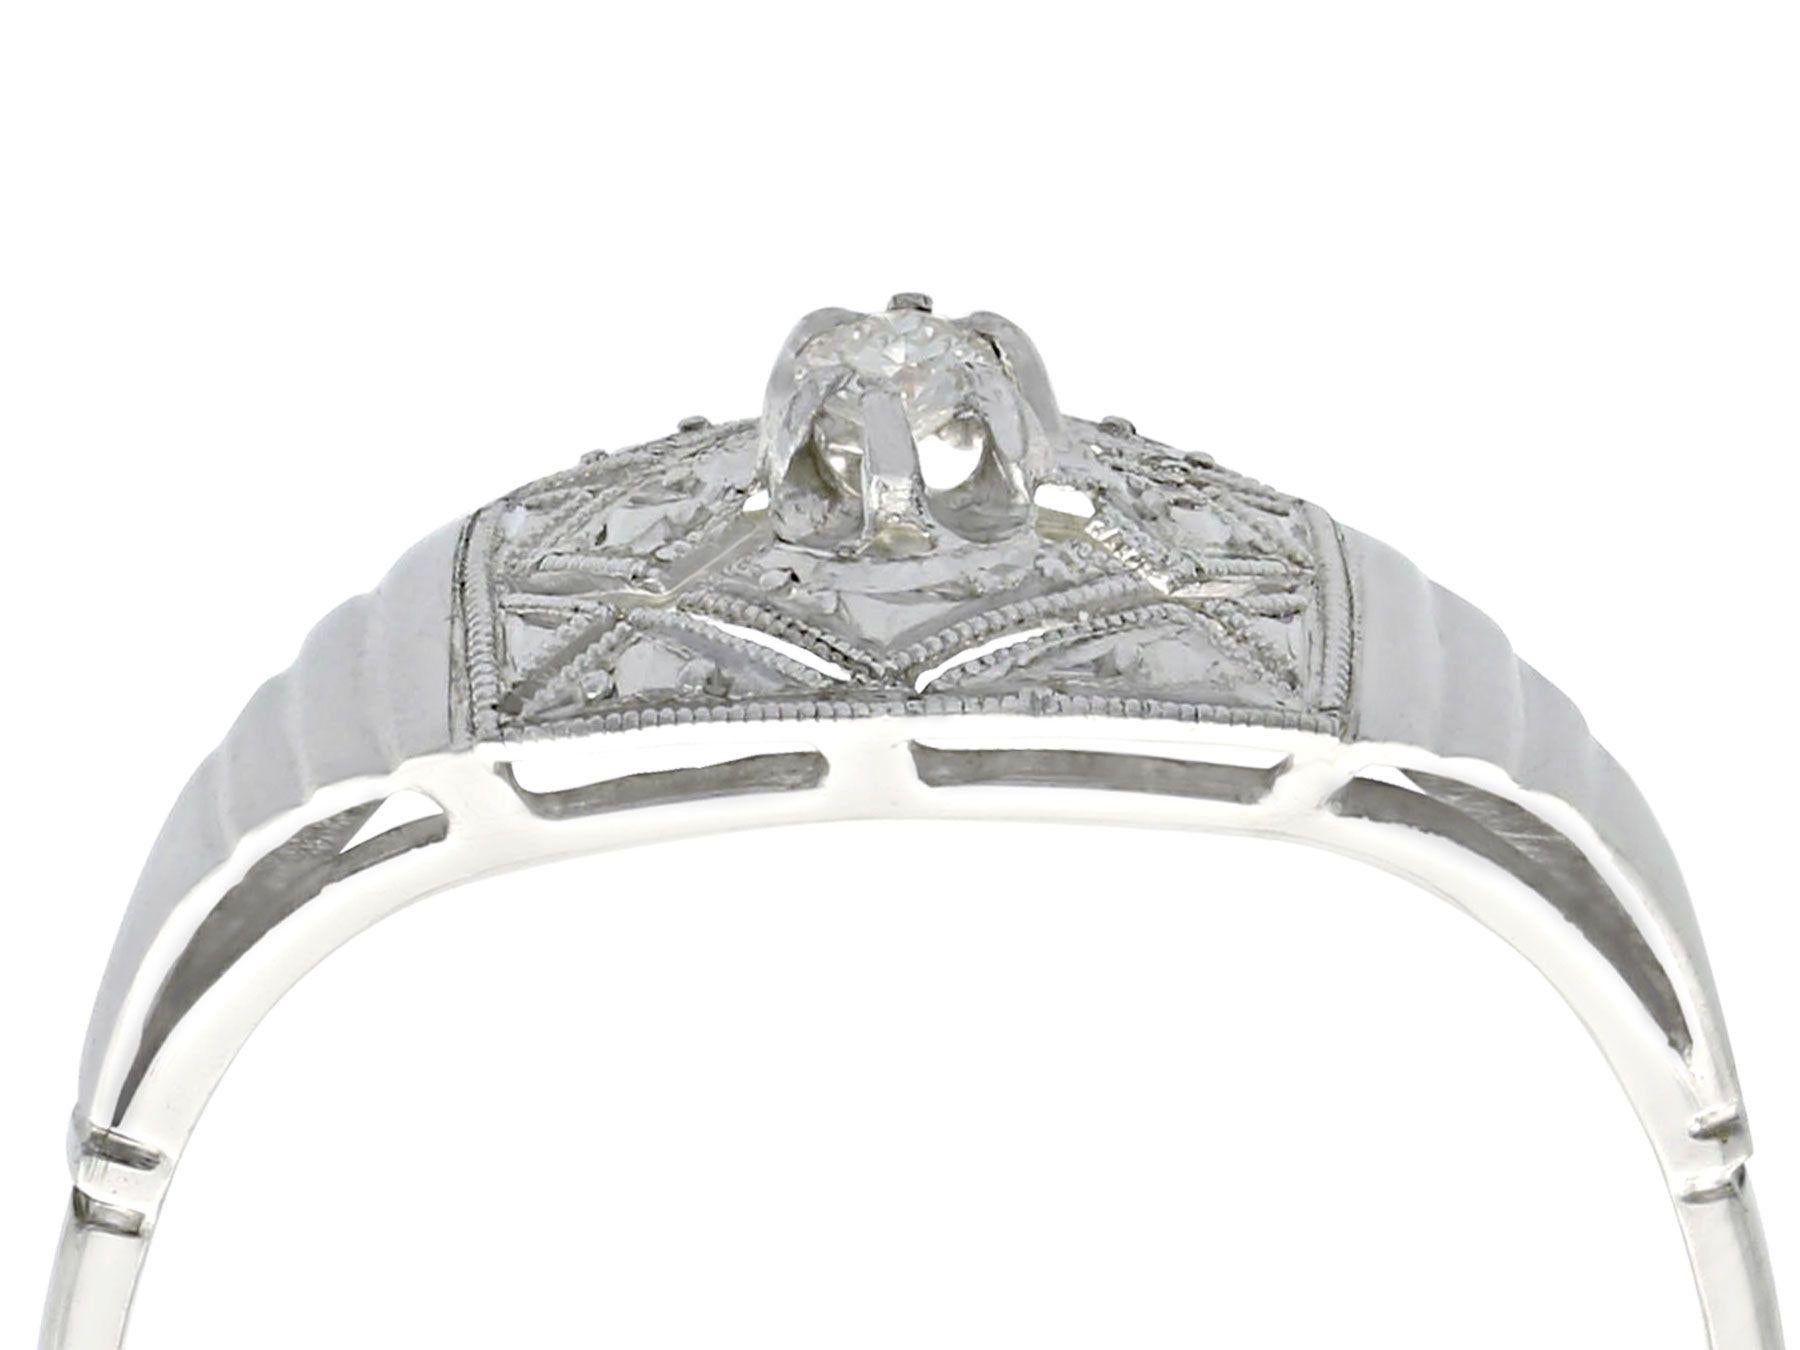 A fine and impressive antique 0.04 carat diamond and 18 karat white gold, platinum set cocktail ring; part of our diverse antique jewelry and estate jewelry collections.

This fine and impressive diamond cocktail ring has bee crafted in 18k white